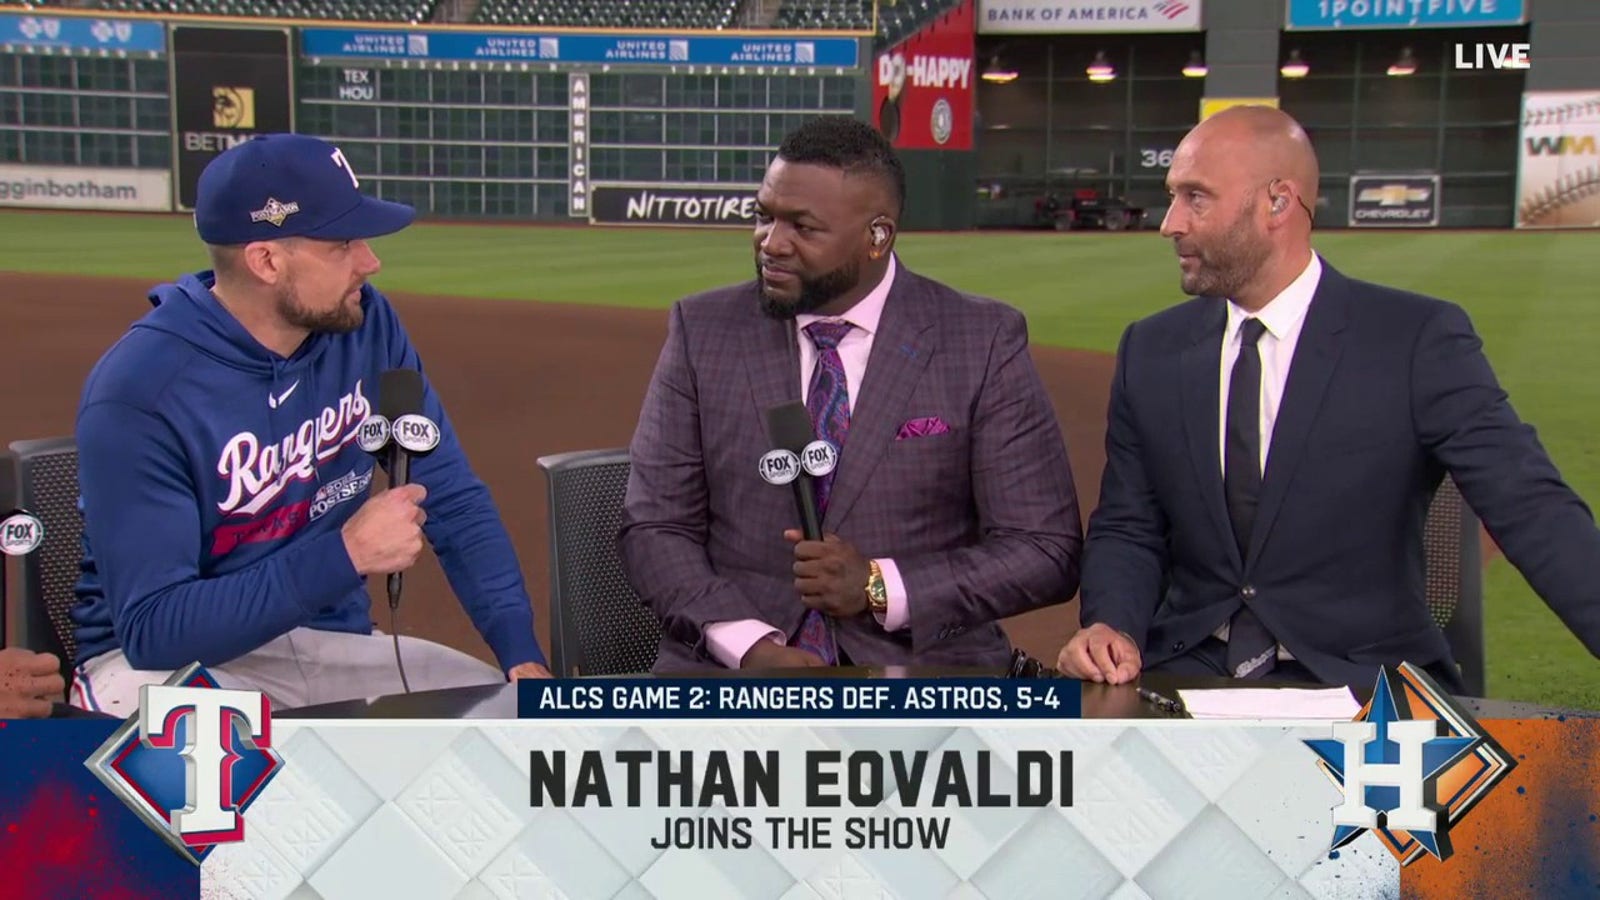 Nathan Eovaldi on what Rangers' rotation could learn from past